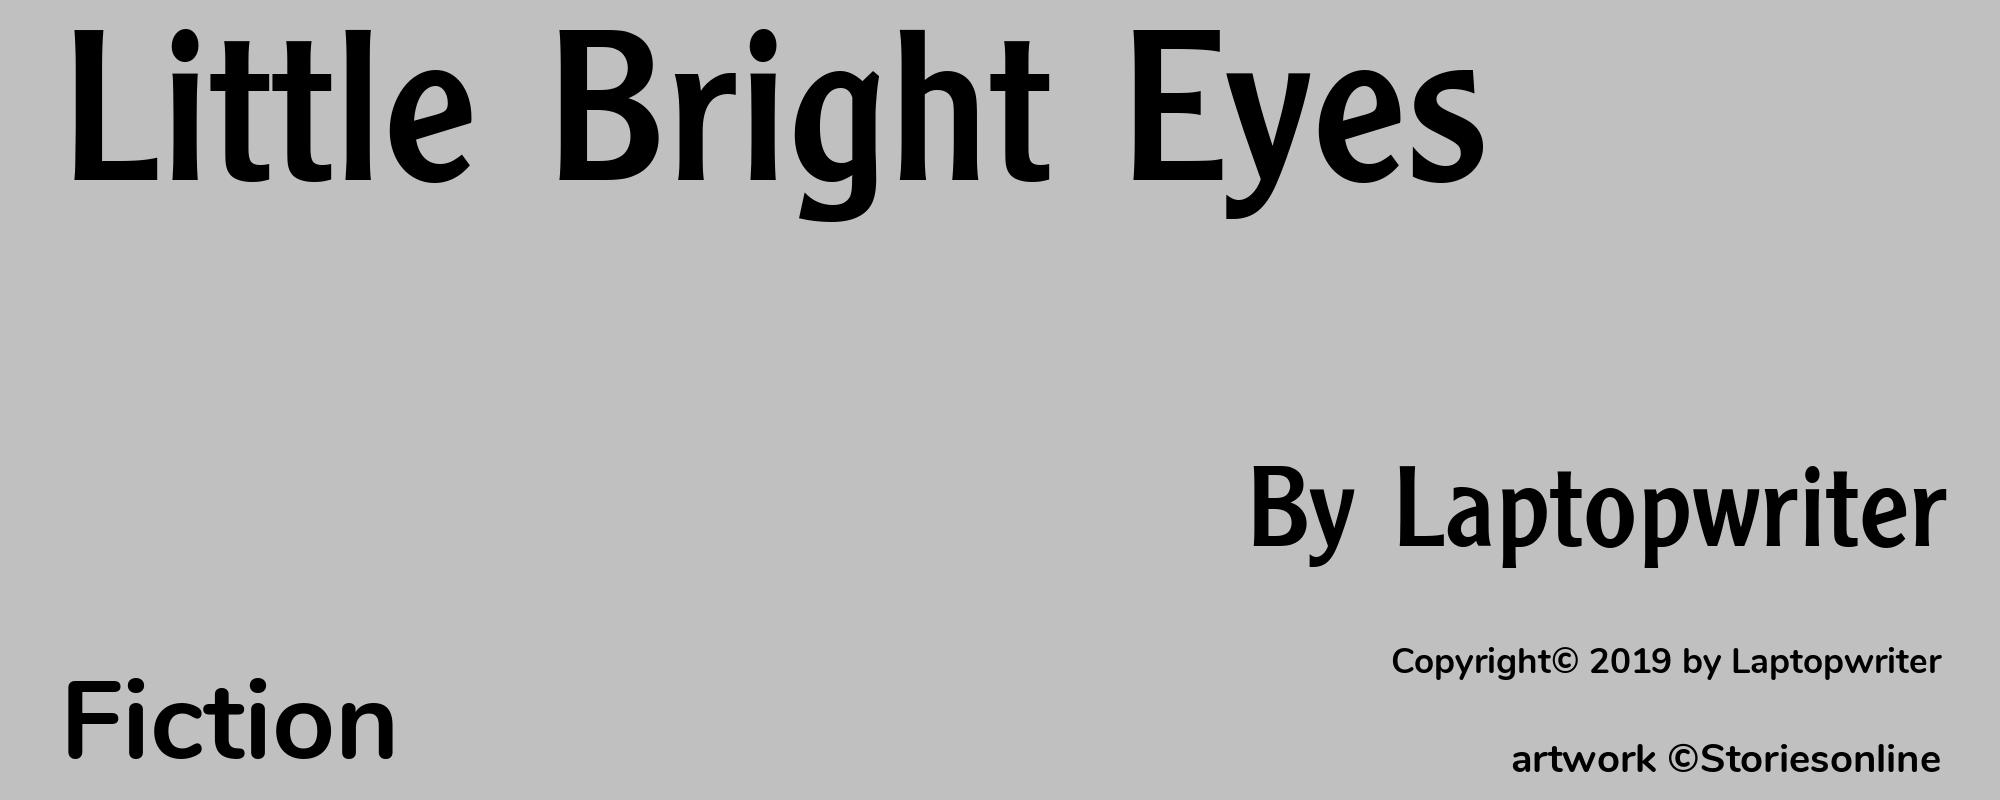 Little Bright Eyes - Cover